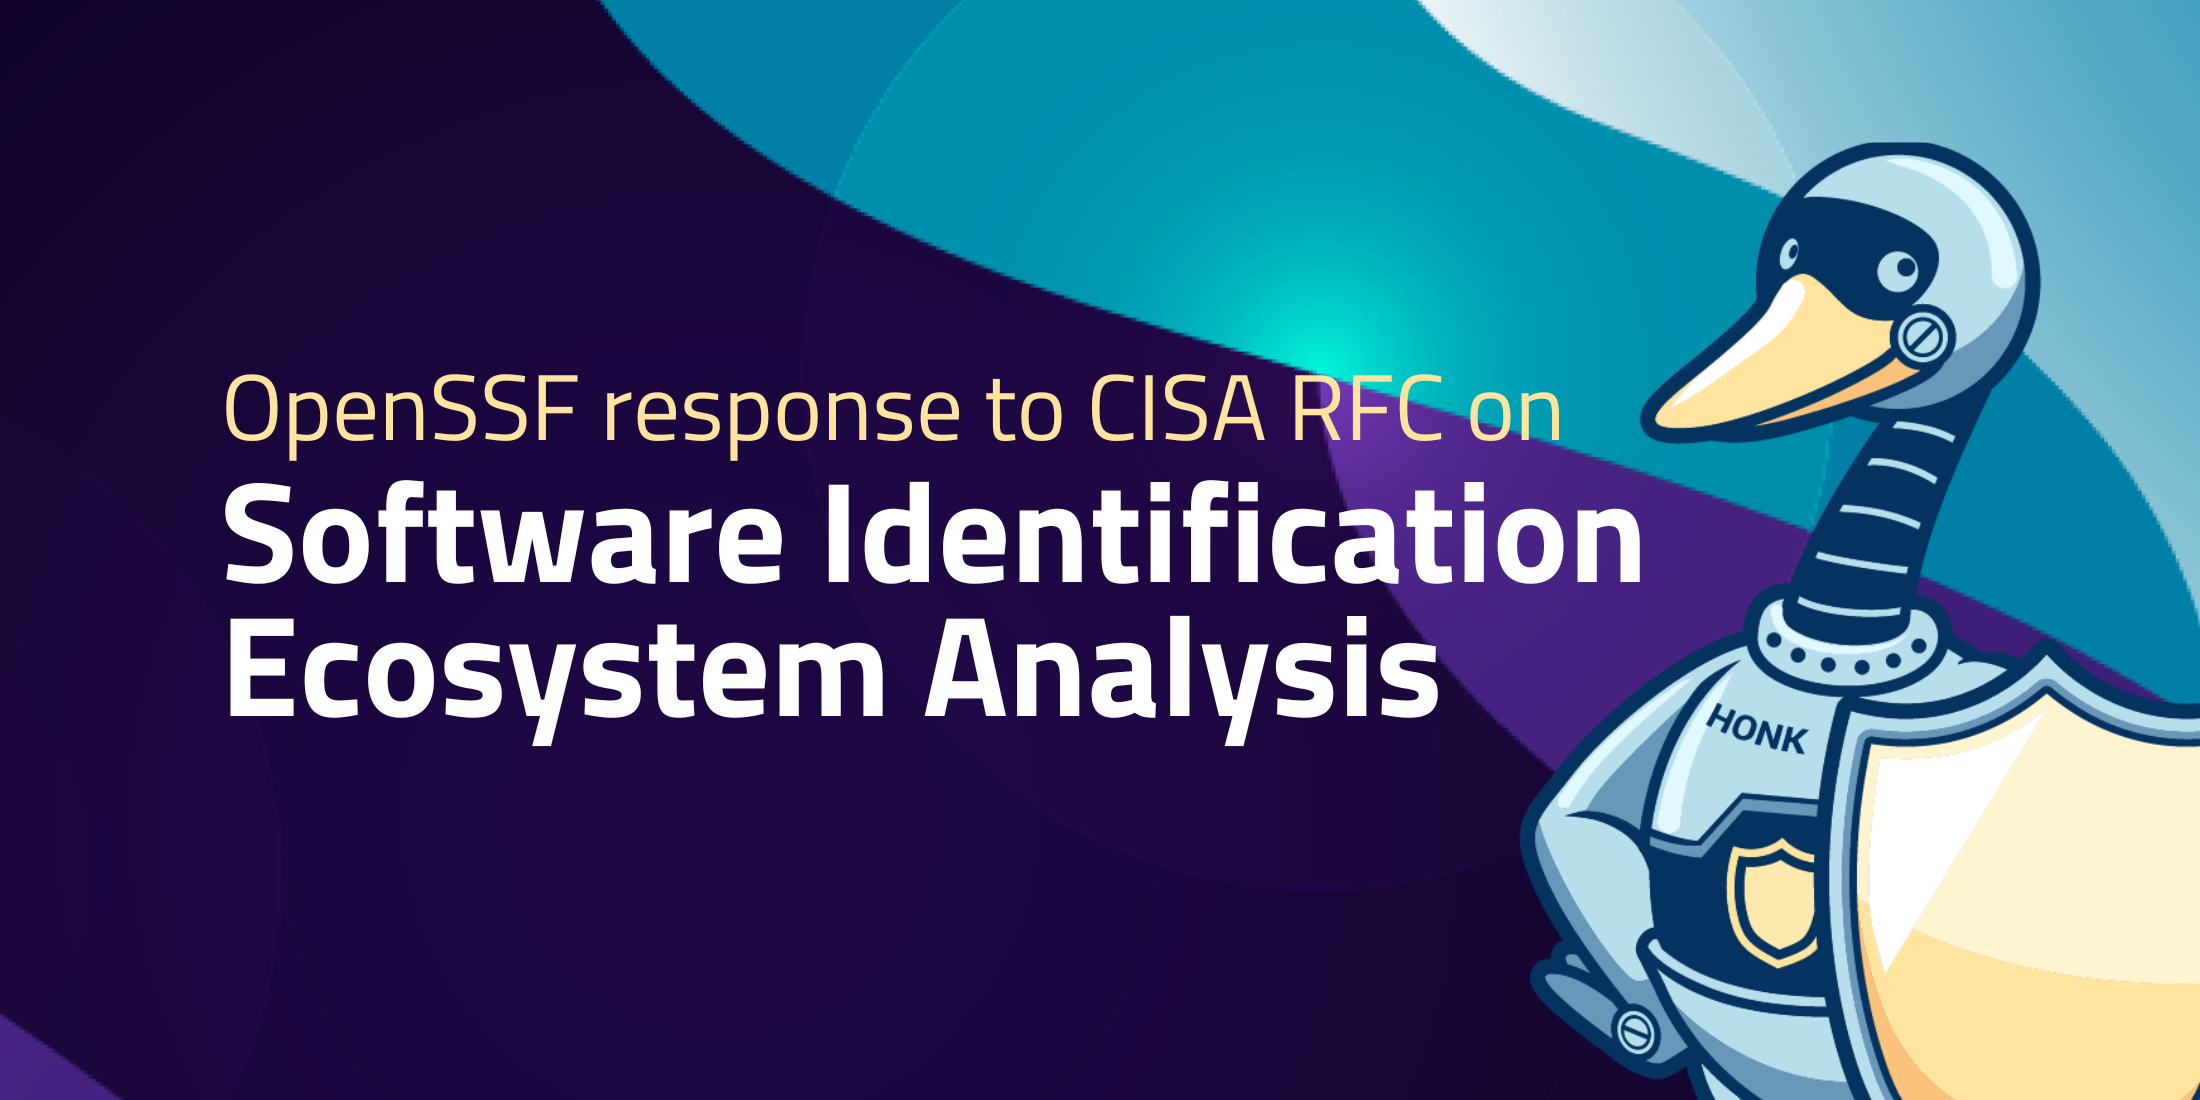 Responds to the CISA RFC on Software Identification Ecosystem Analysis